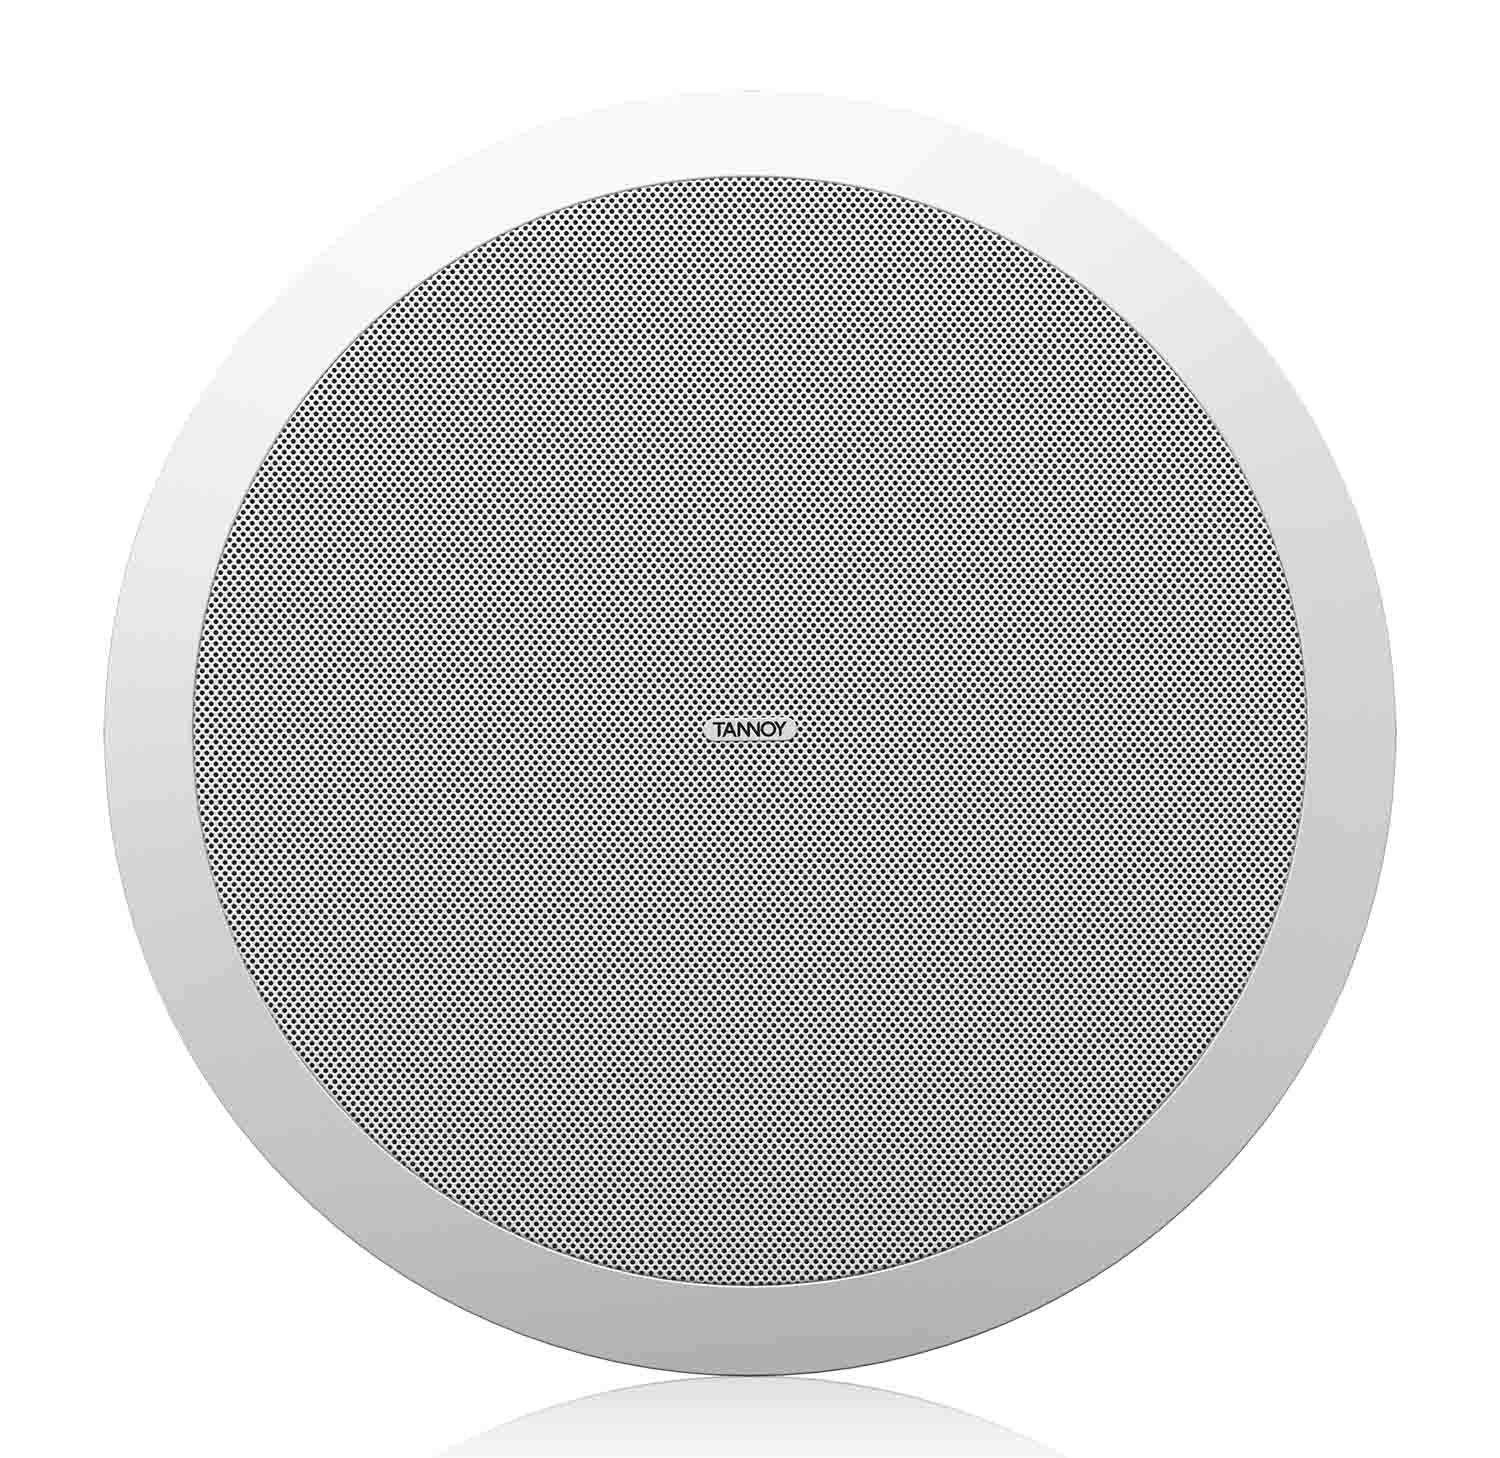 Tannoy CMS 603ICT PI, 6-Inch Full Range Ceiling Loudspeaker with ICT Driver - Pre-Install - Hollywood DJ